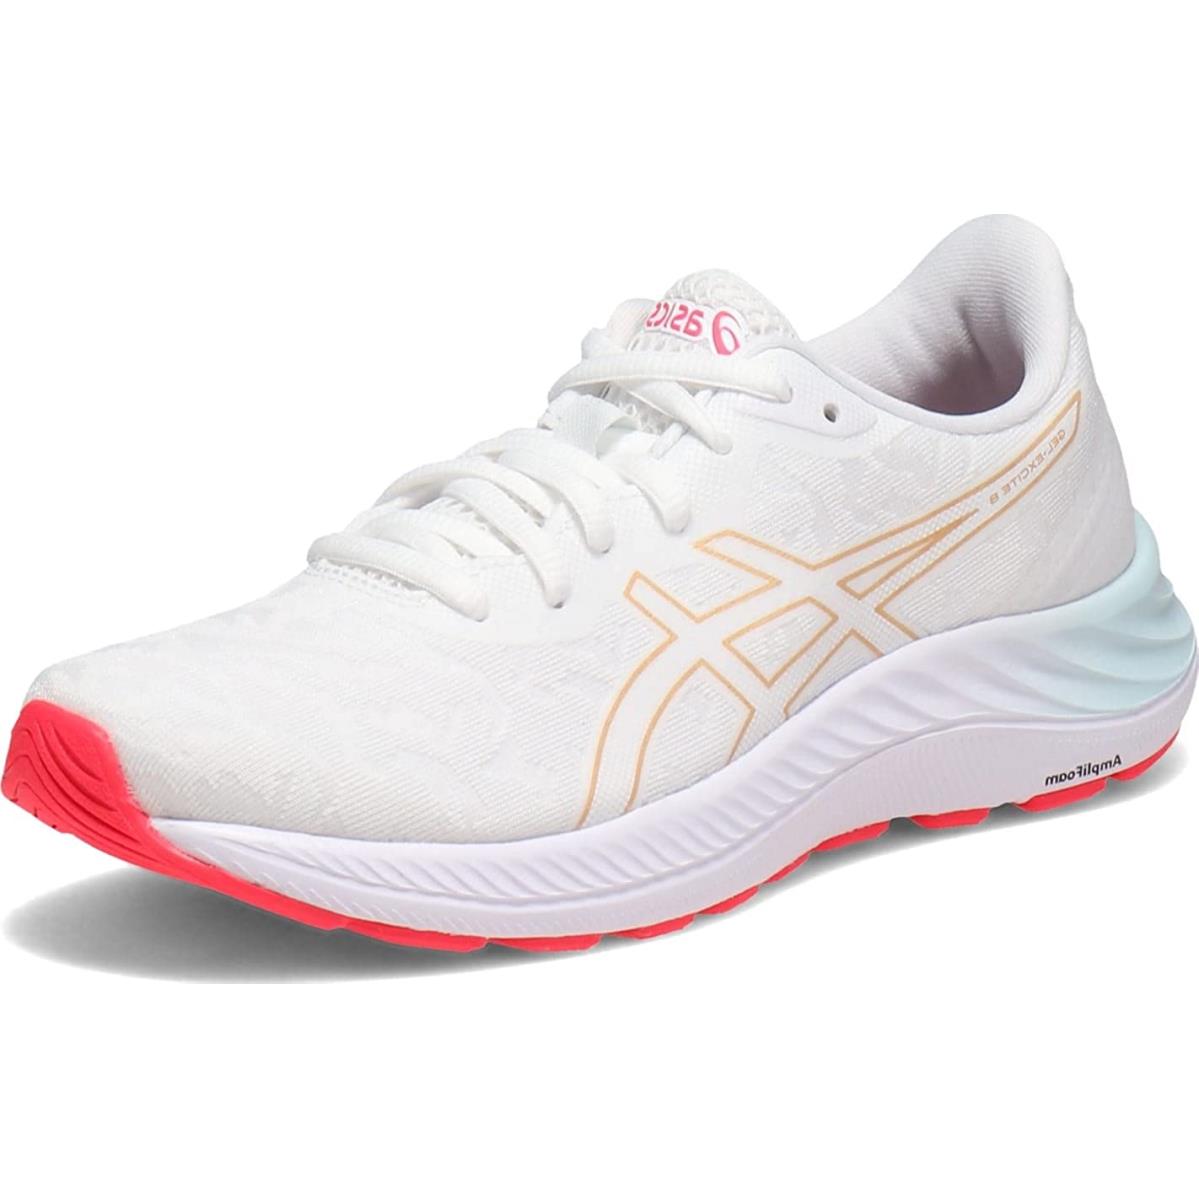 Asics Women`s Gel-excite 8 Running Shoes White/Champagne